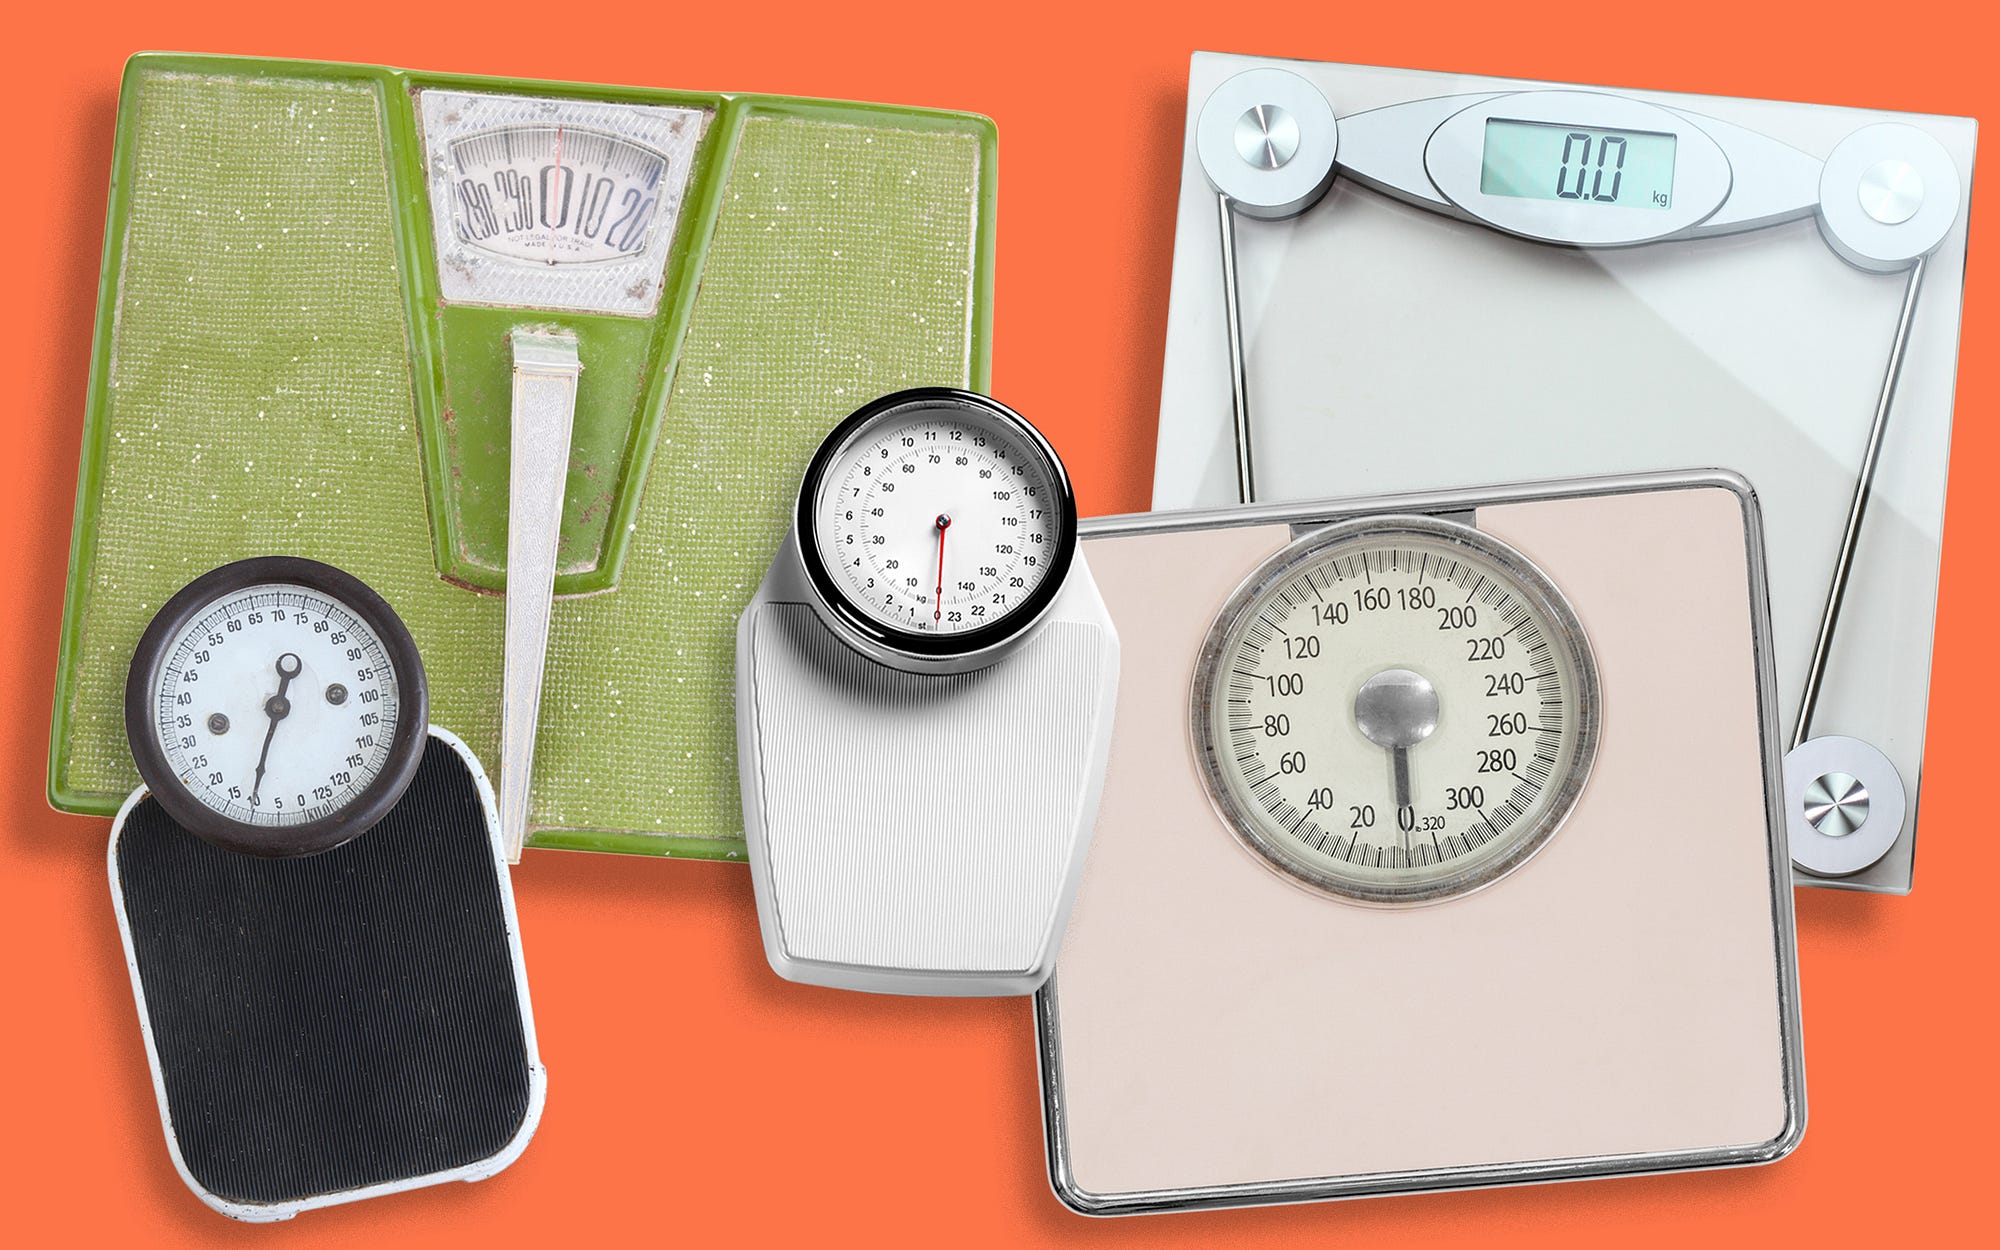 The Completely Bonkers History of the Bathroom Scale, by Kelsey Miller